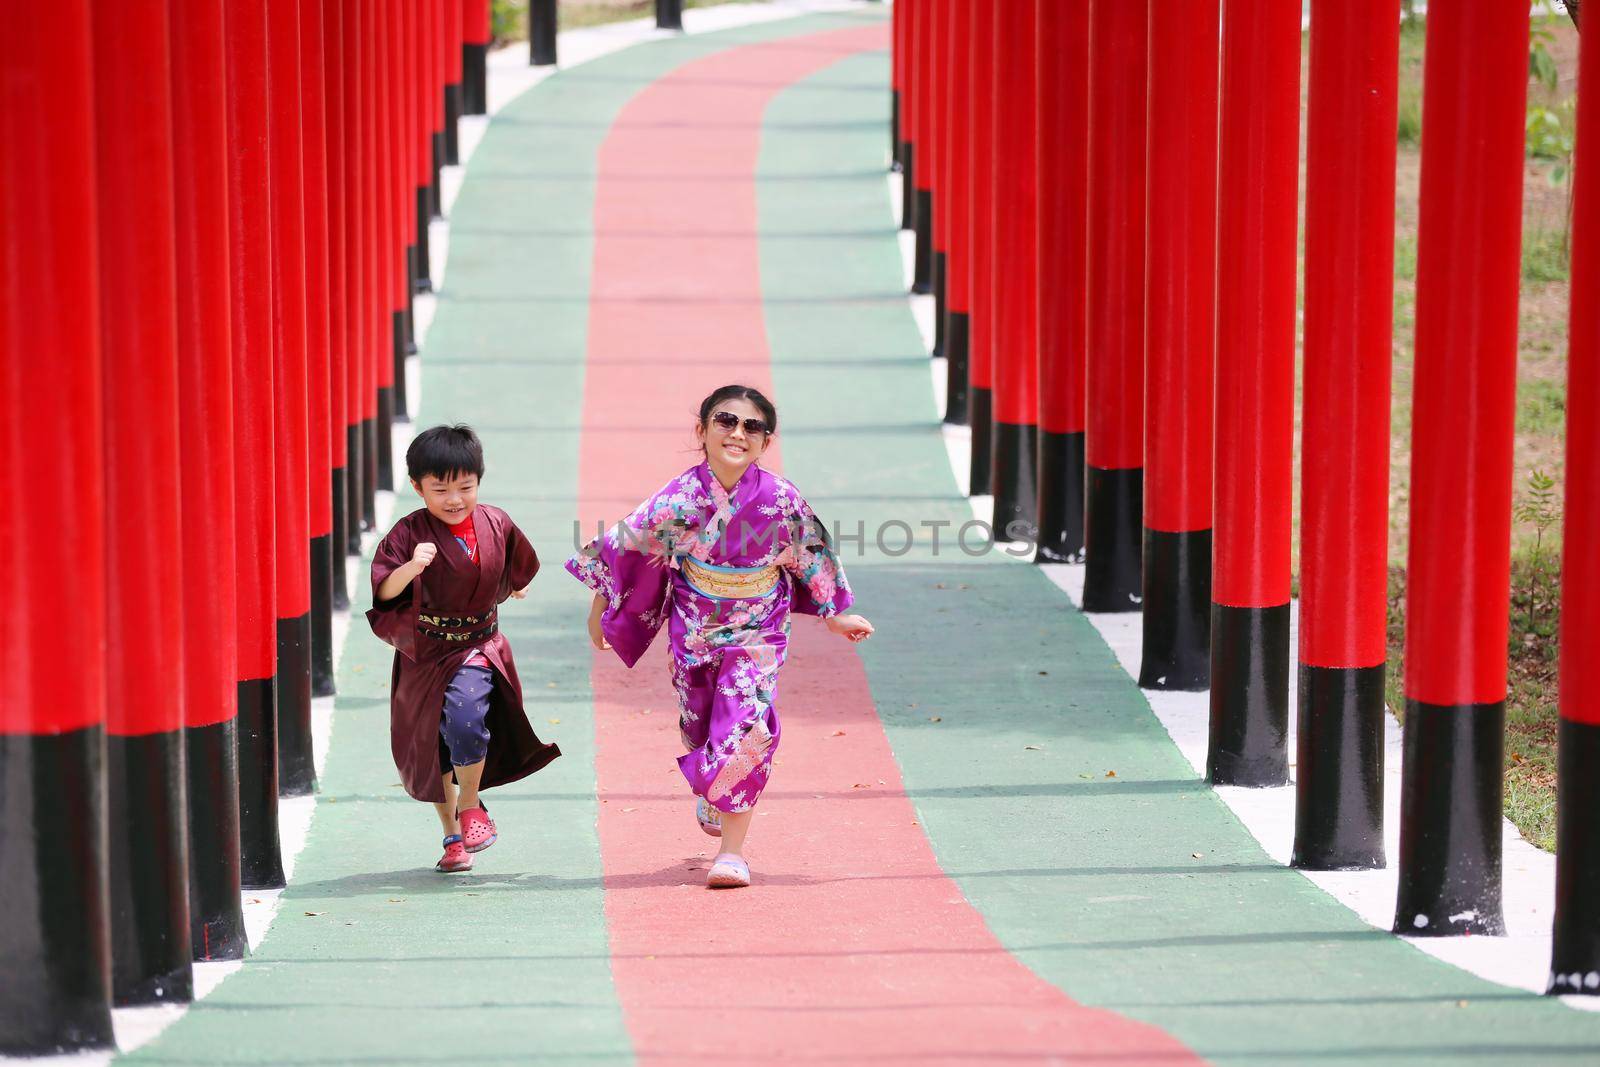 Two kids in kimono walking into at the shrine red gate, in Japanese garden.